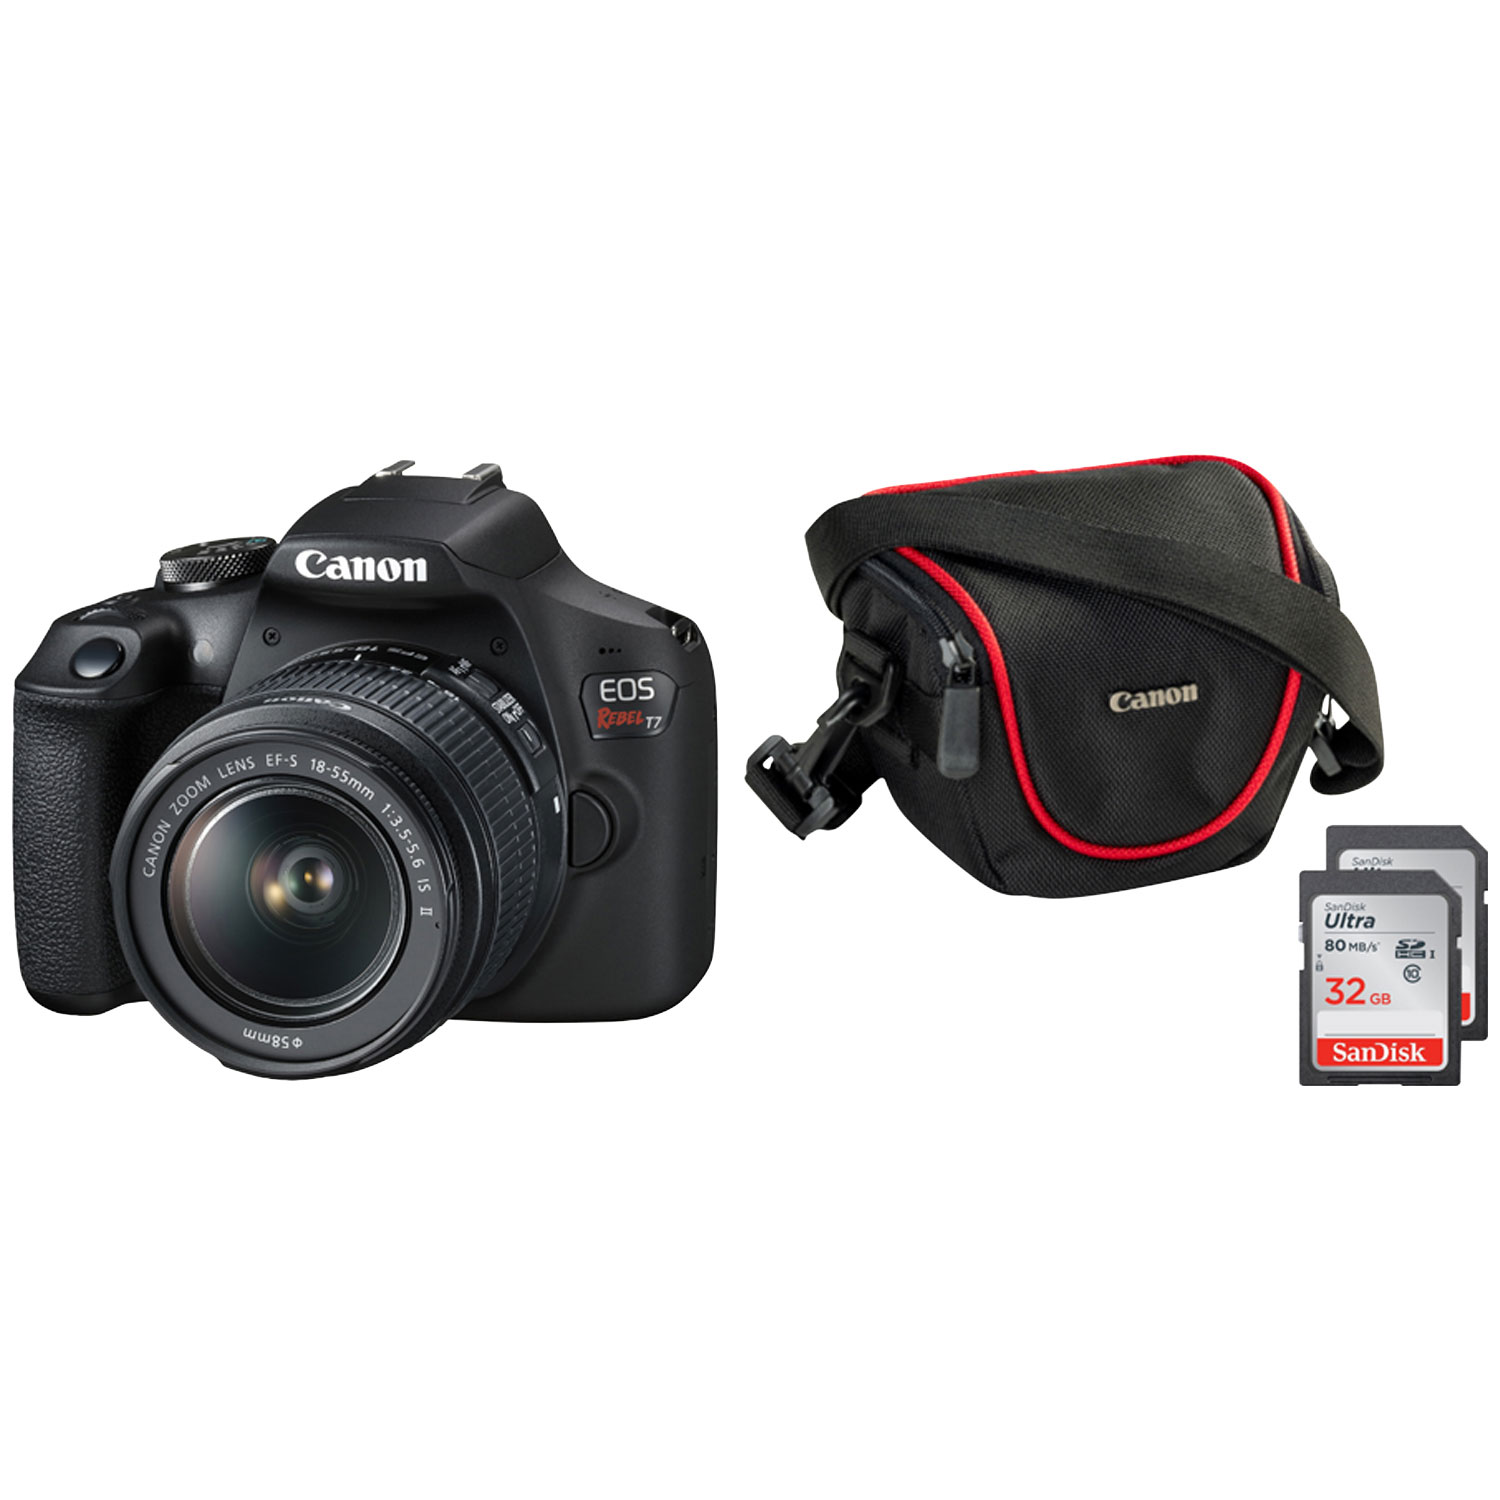 Canon EOS Rebel T7 DSLR Camera with 18-55mm IS Lens Kit & REBEL T7 Accessory Kit